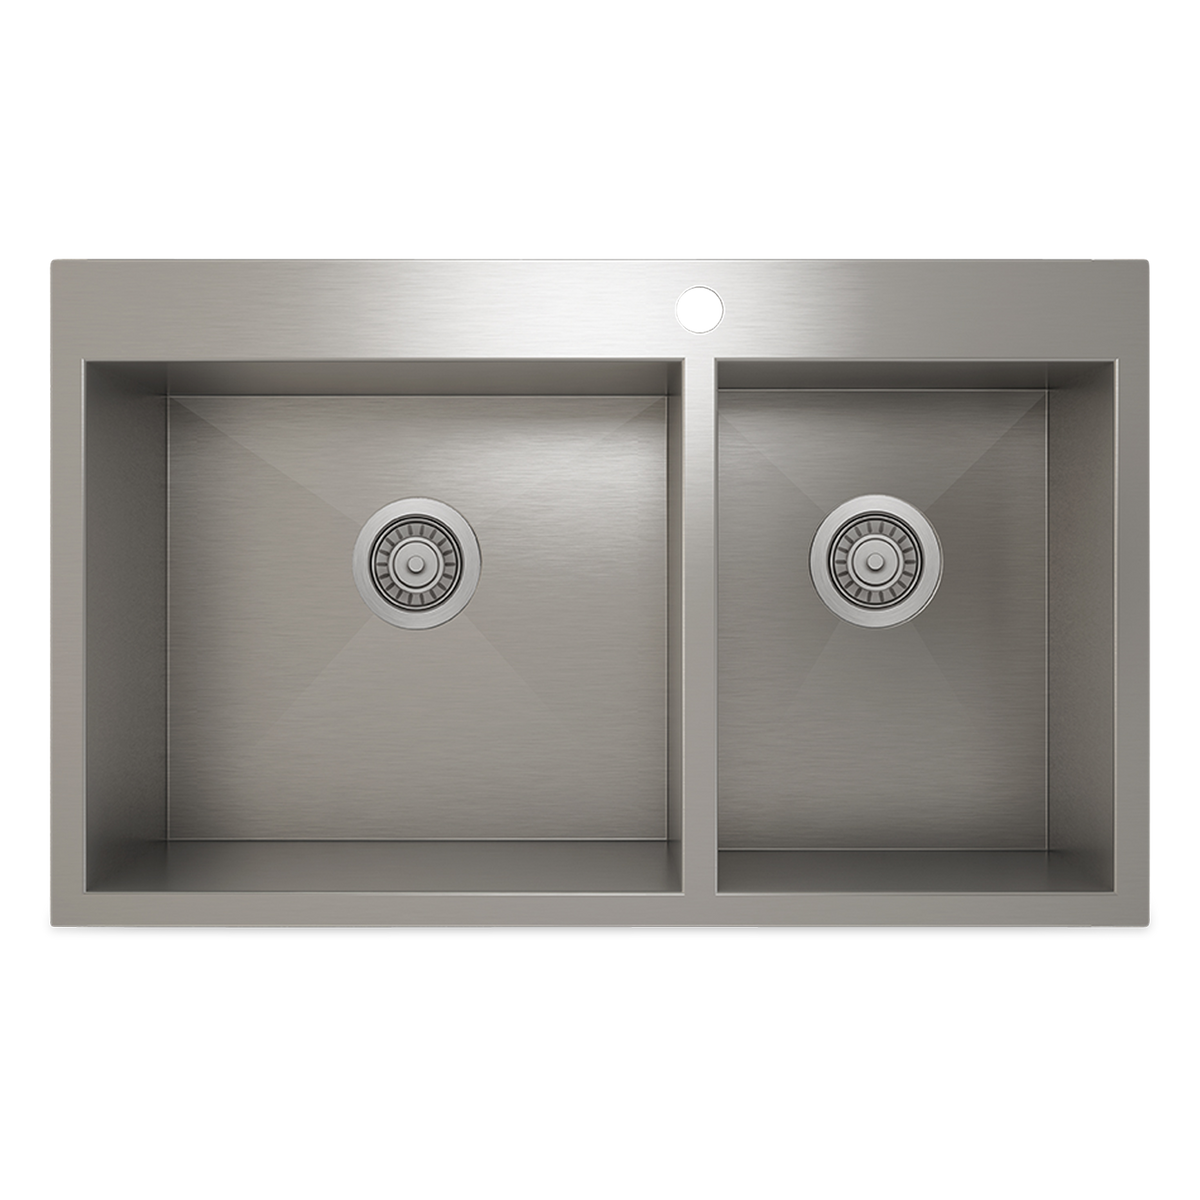 Chand 3320.9 Sink (Top-Mount) - Stainless Steel